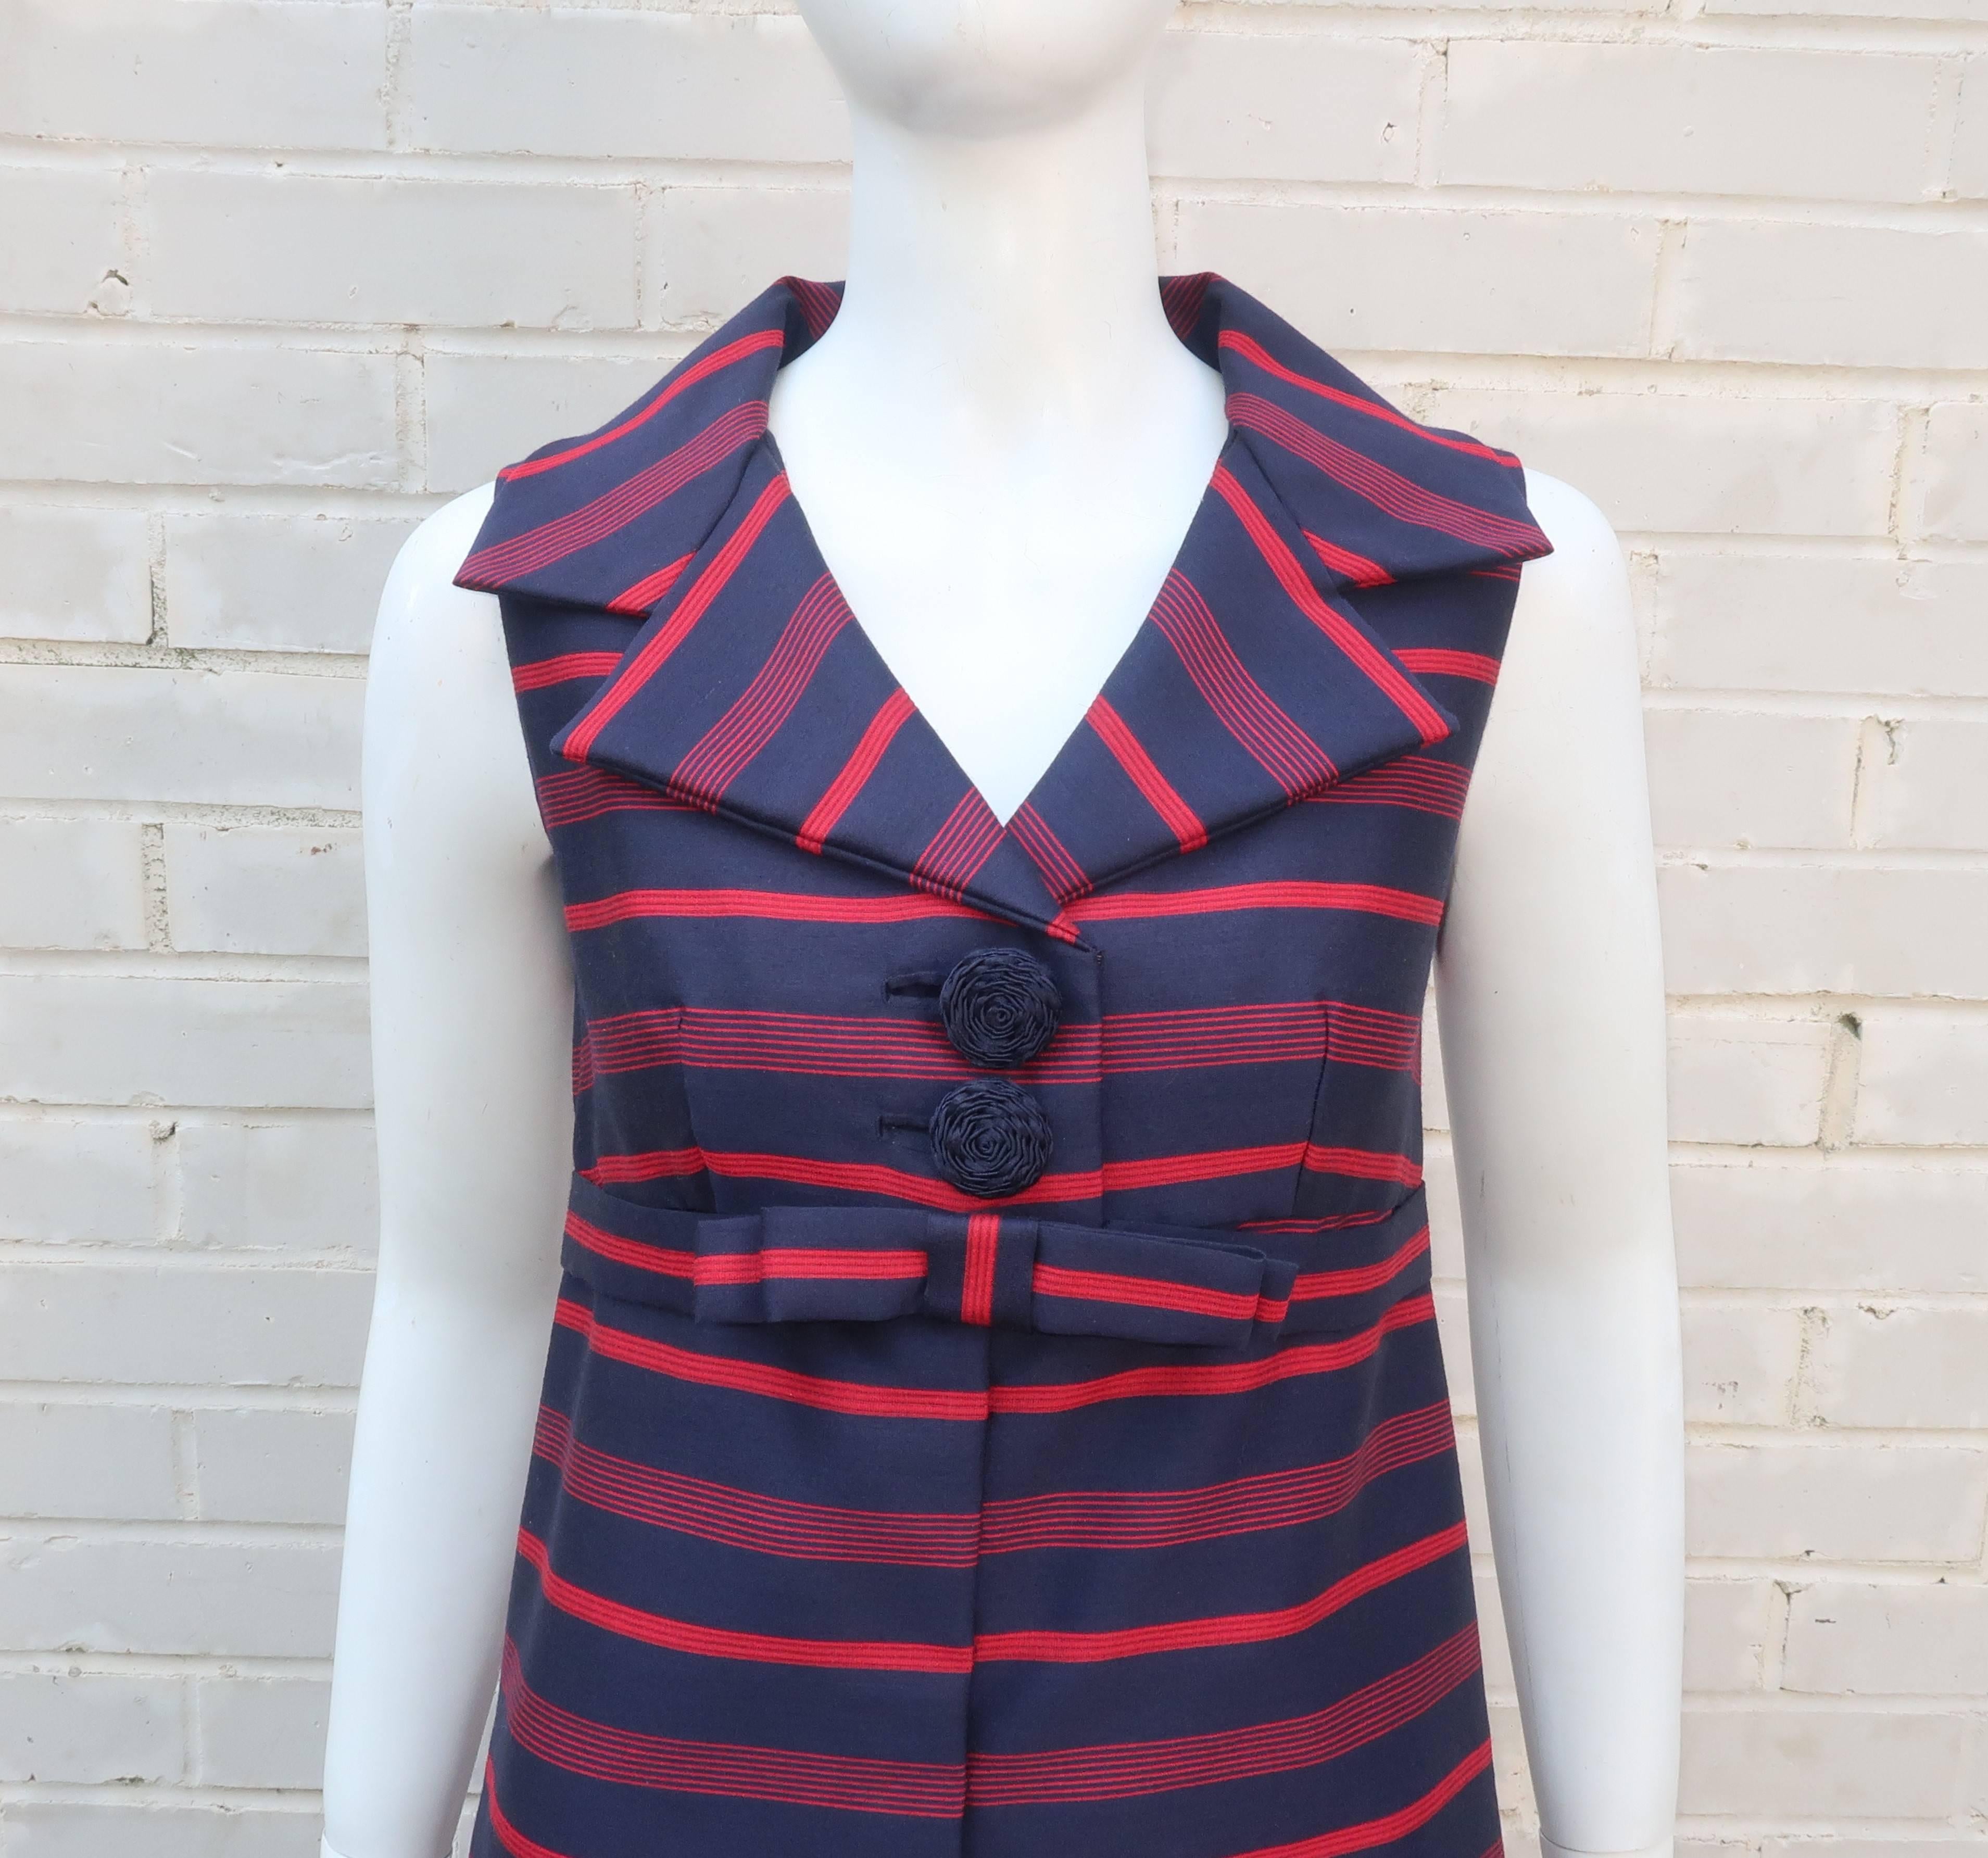 An adorable 'That Girl' style 1960's custom made a-line dress in a dark blue and red striped fabric that feels like a silk and wool blend.  The fabric has the perfect weight and stiffness to create a sculptural silhouette which is accented by a